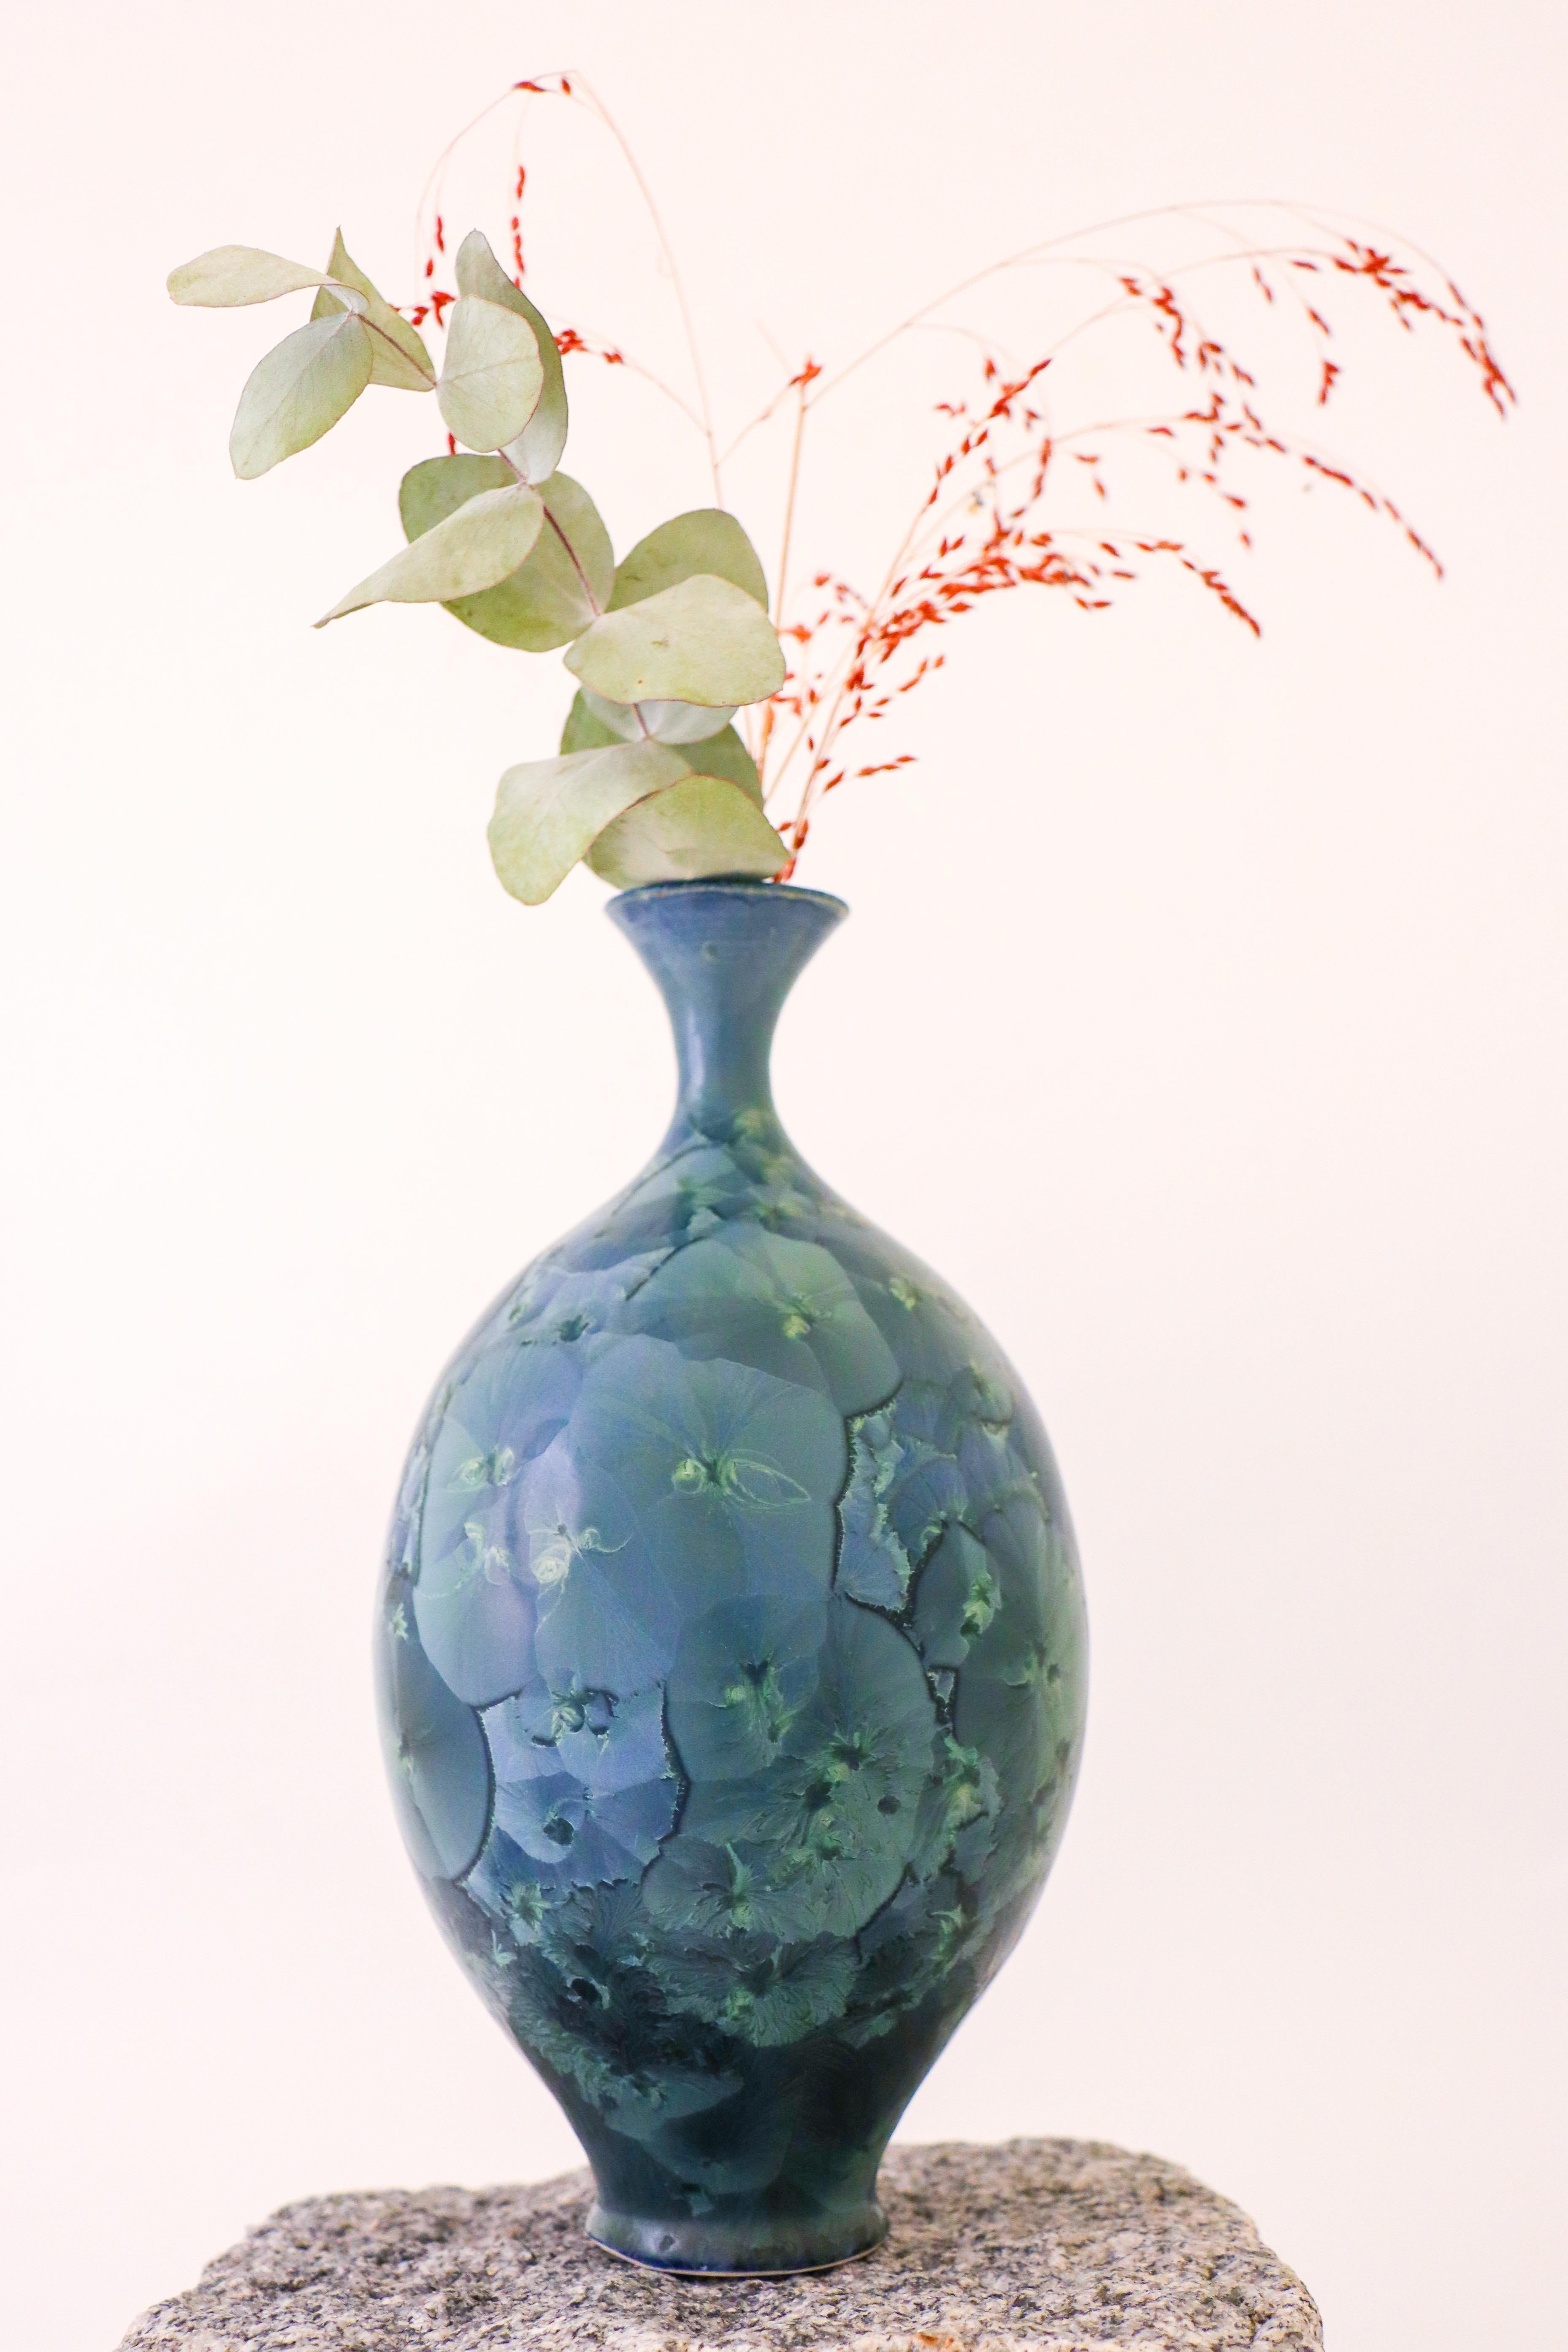 A beautiful green / blue-toned vase with a stunning crystalline glaze designed by Isak Isaksson in Sweden. The vase is 22.5 cm (9